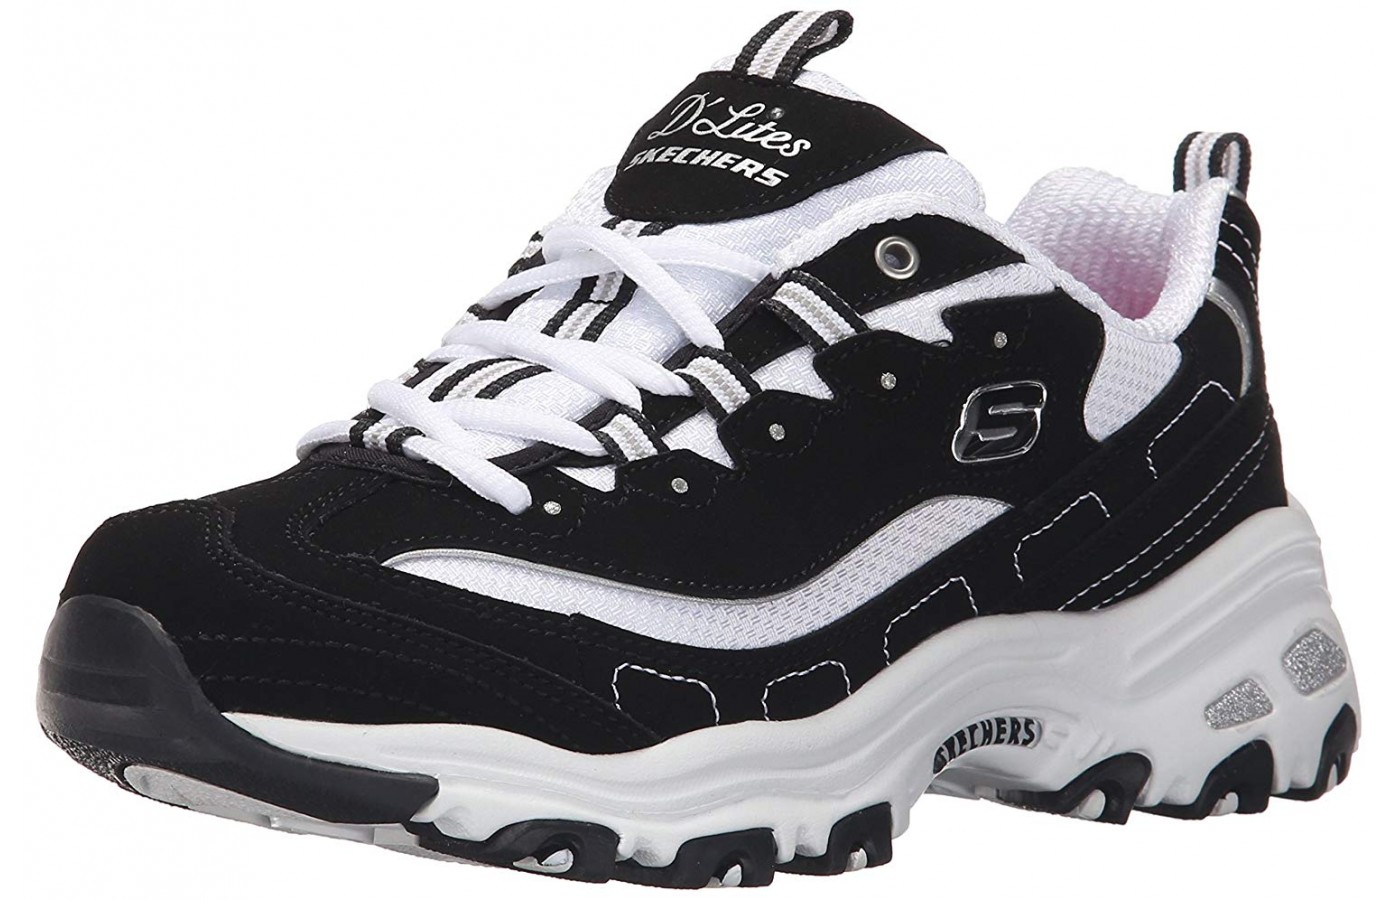 Skechers D'Lites Angled View